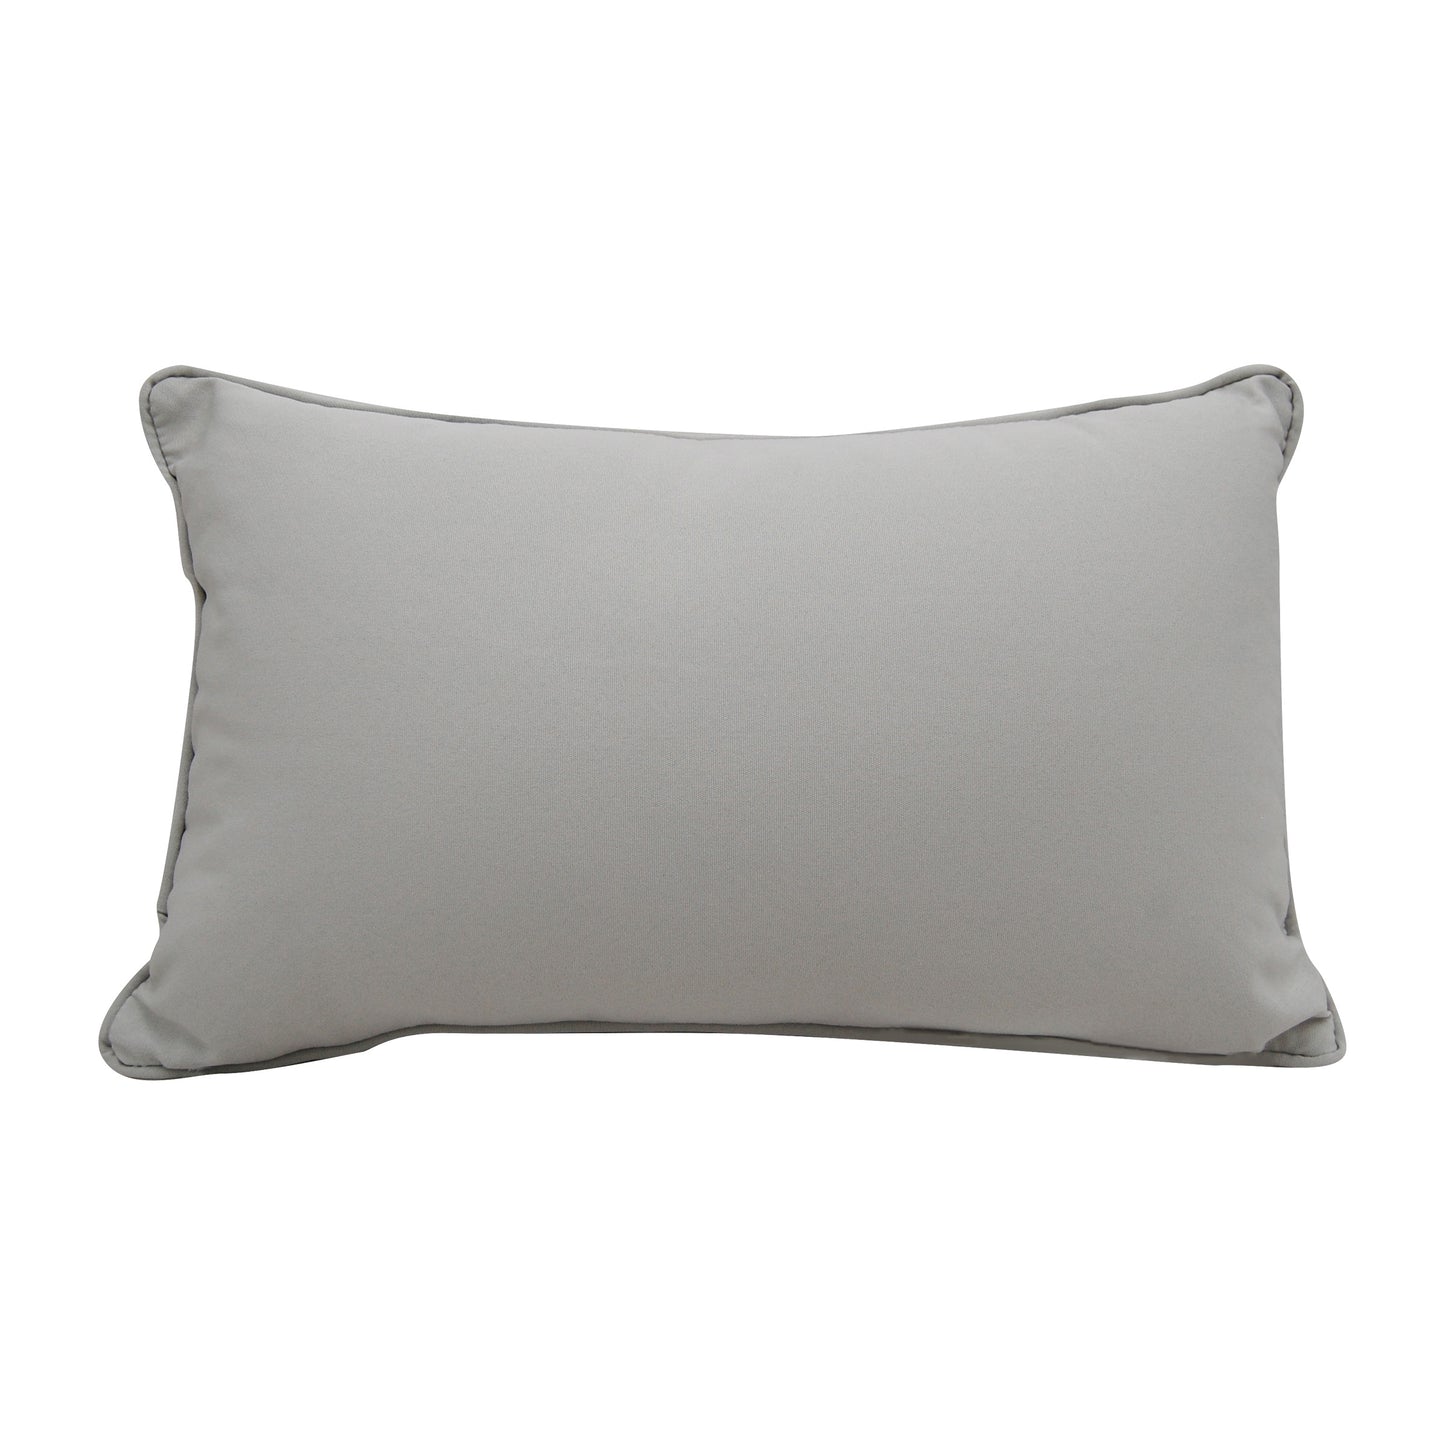 Solid grey fabric; the back side of the Modern Lake Triangle indoor outdoor pillow.